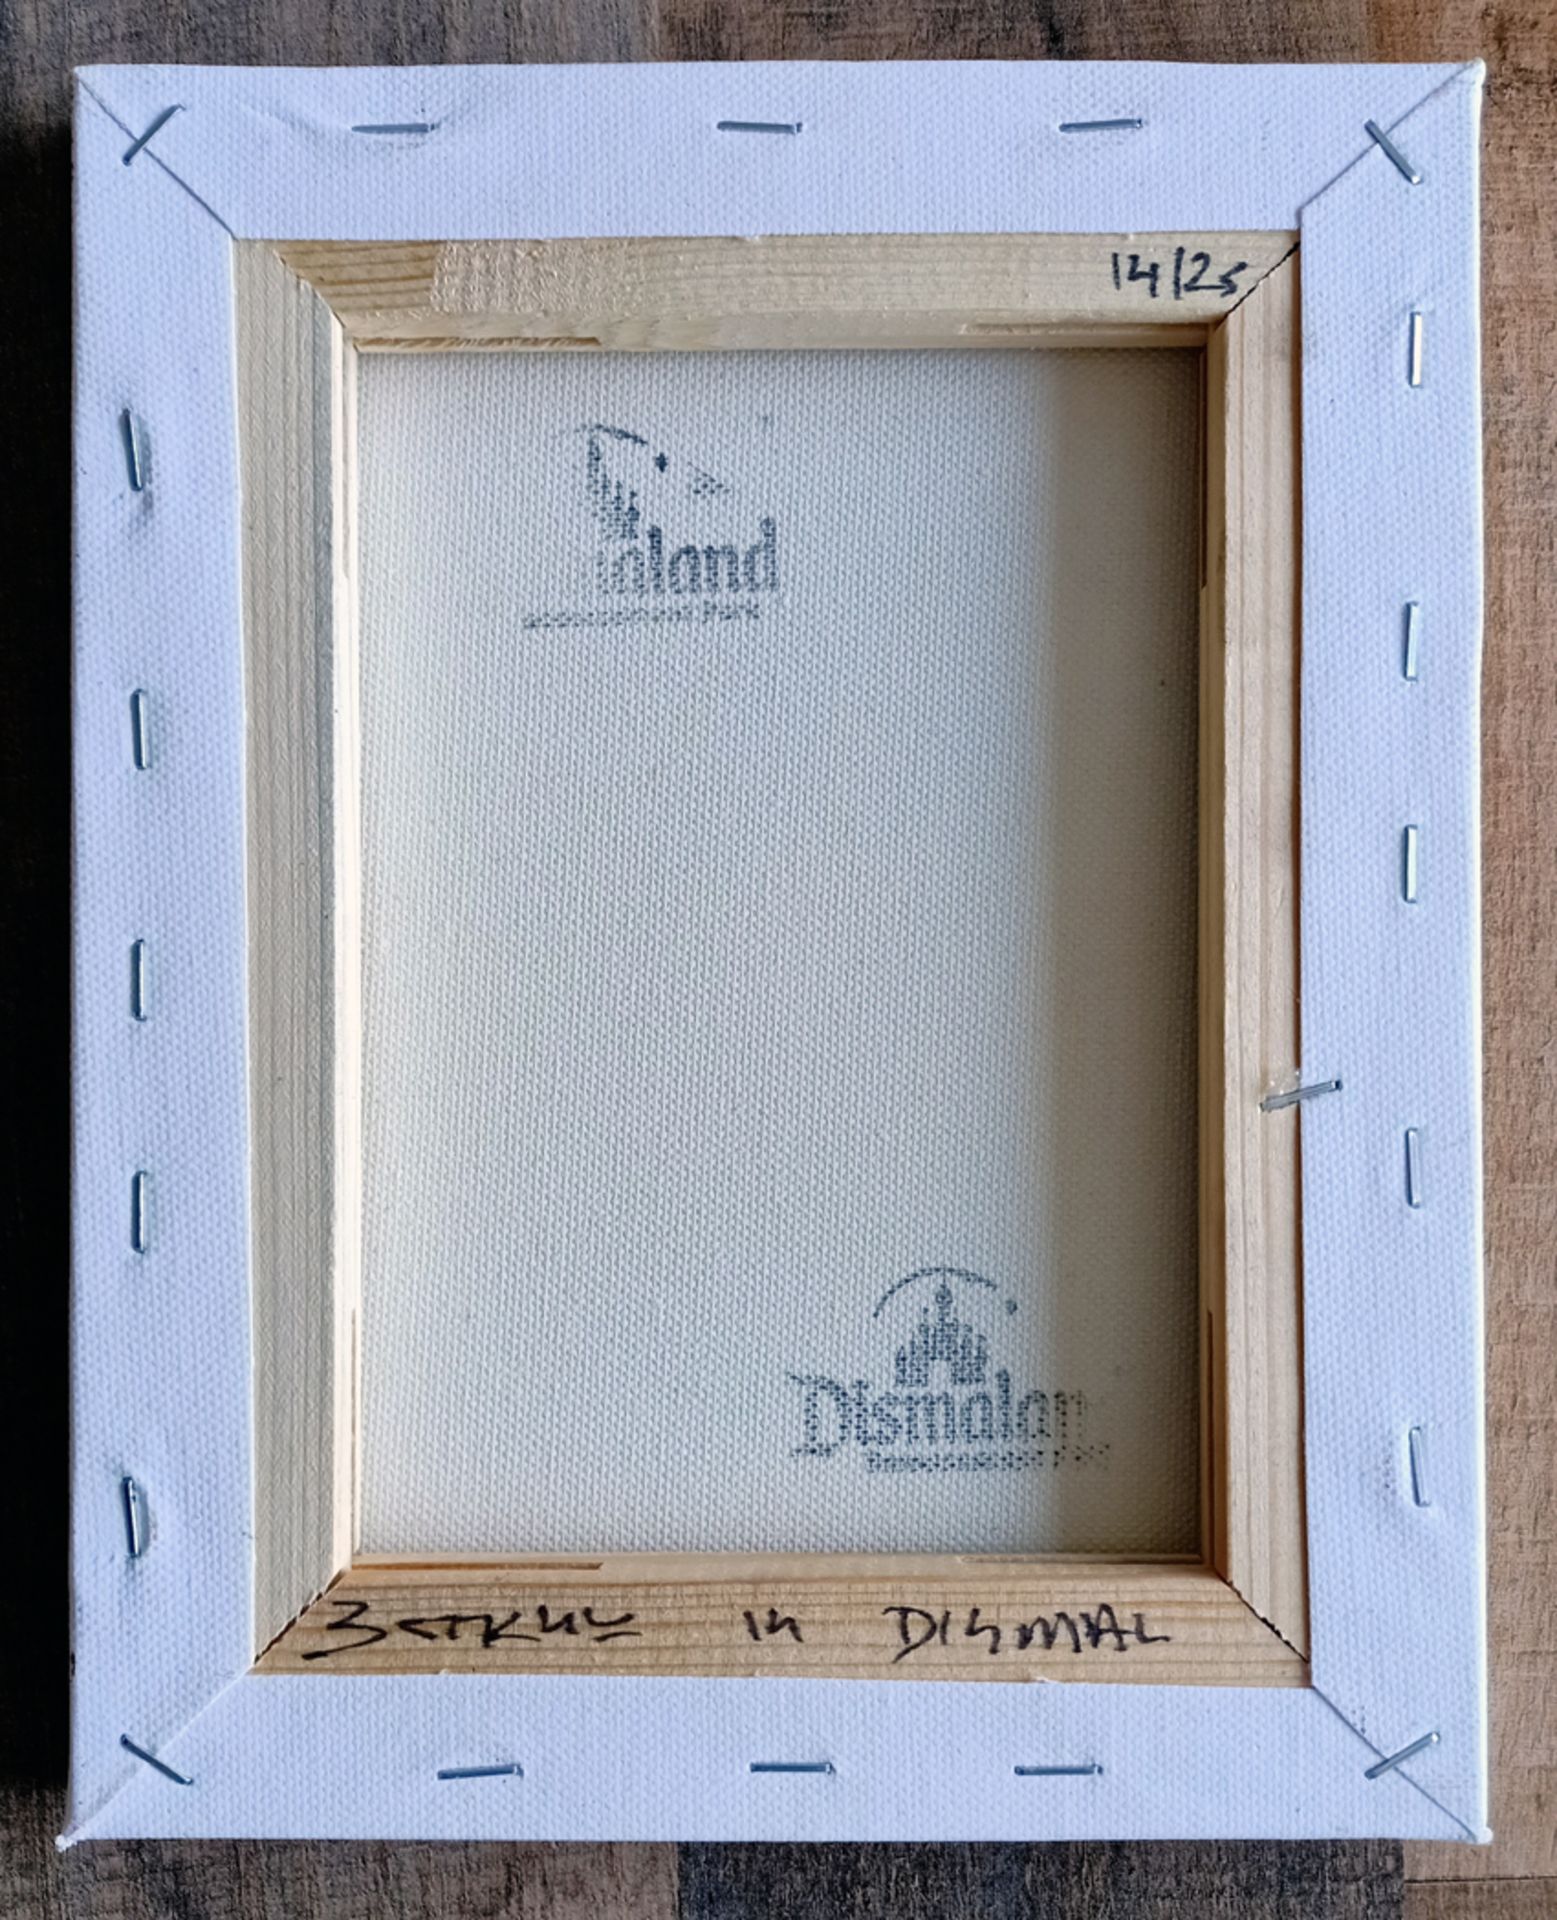 Banksy (Attributed) WSM Dismaland Boy Praying Canvas w/Ticket, Letter and Envelope. (#0594) - Image 4 of 6